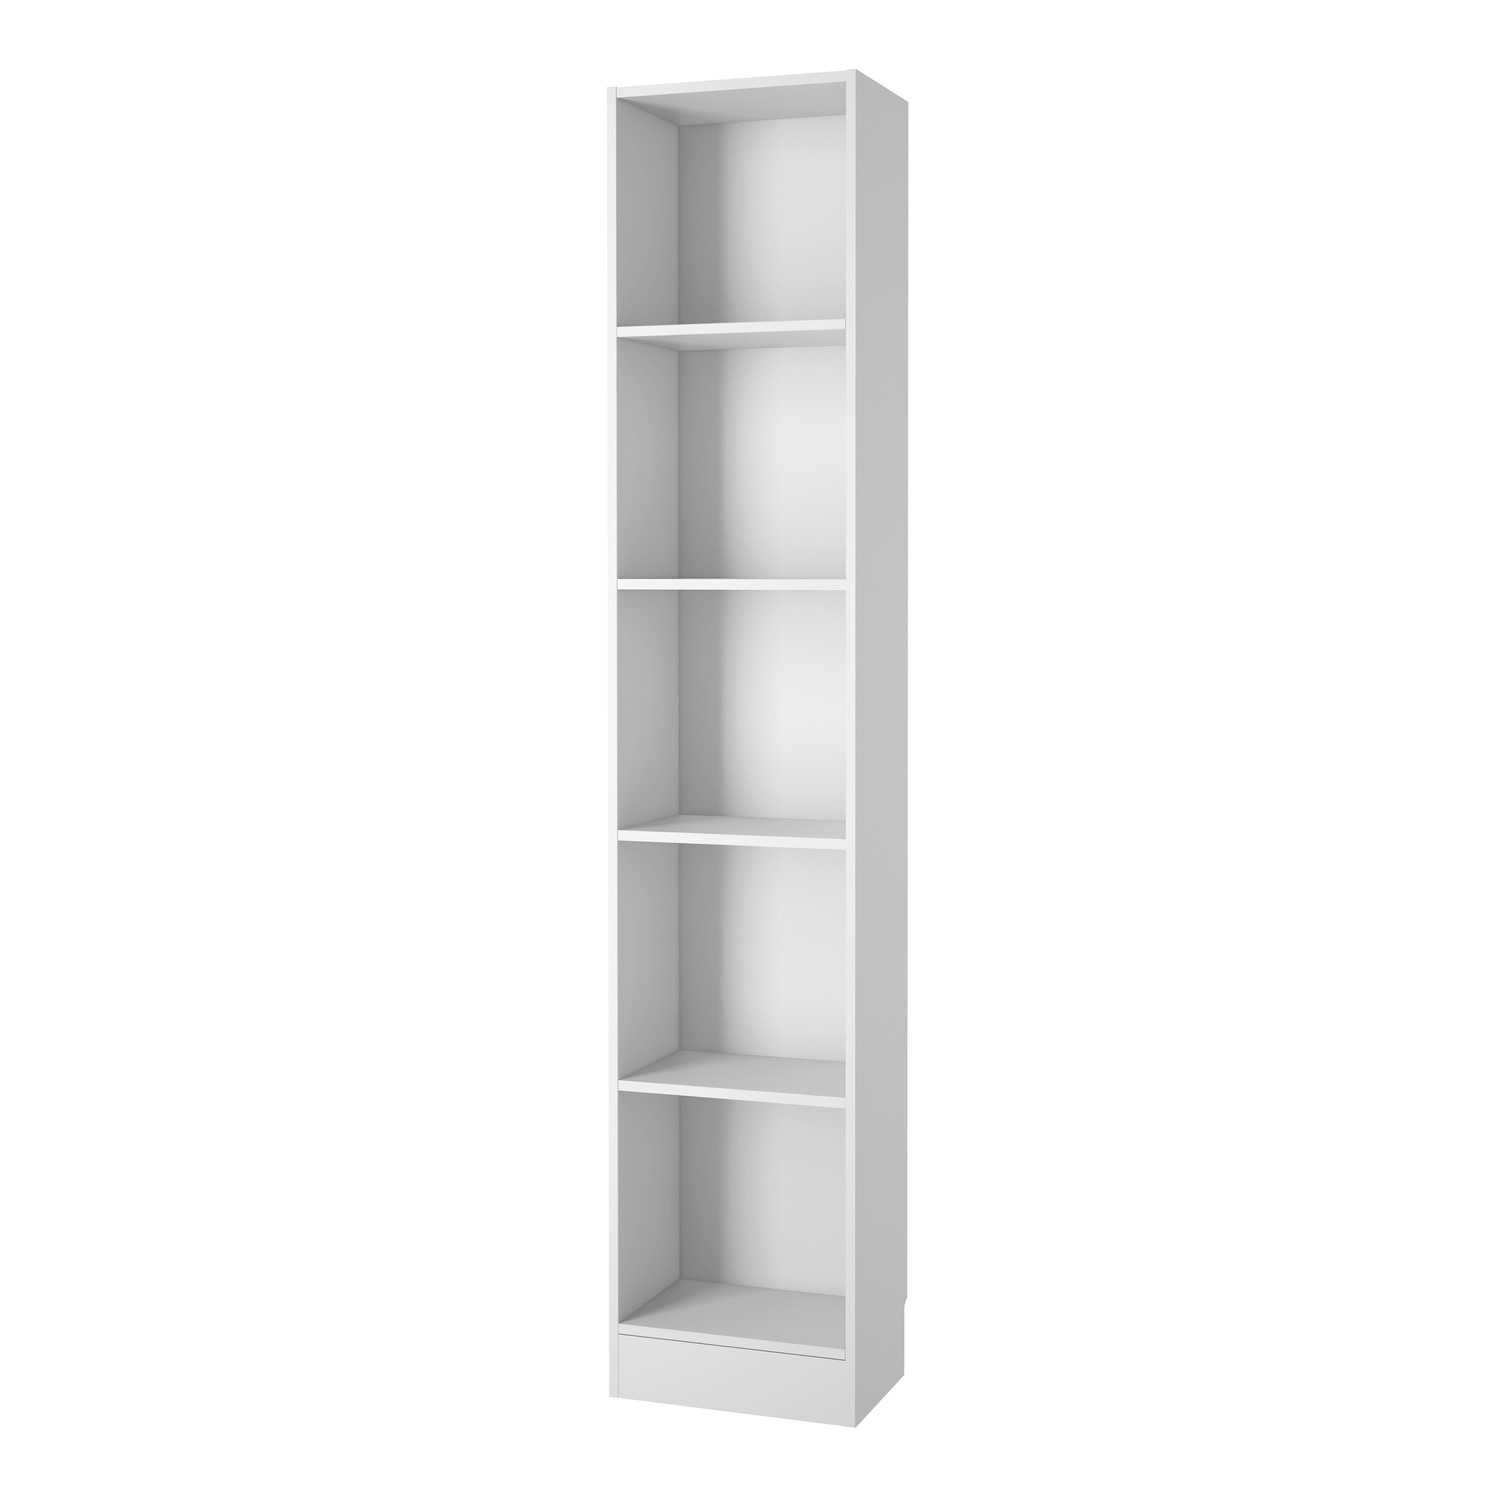 Read more about Tall and narrow white bookcase basic